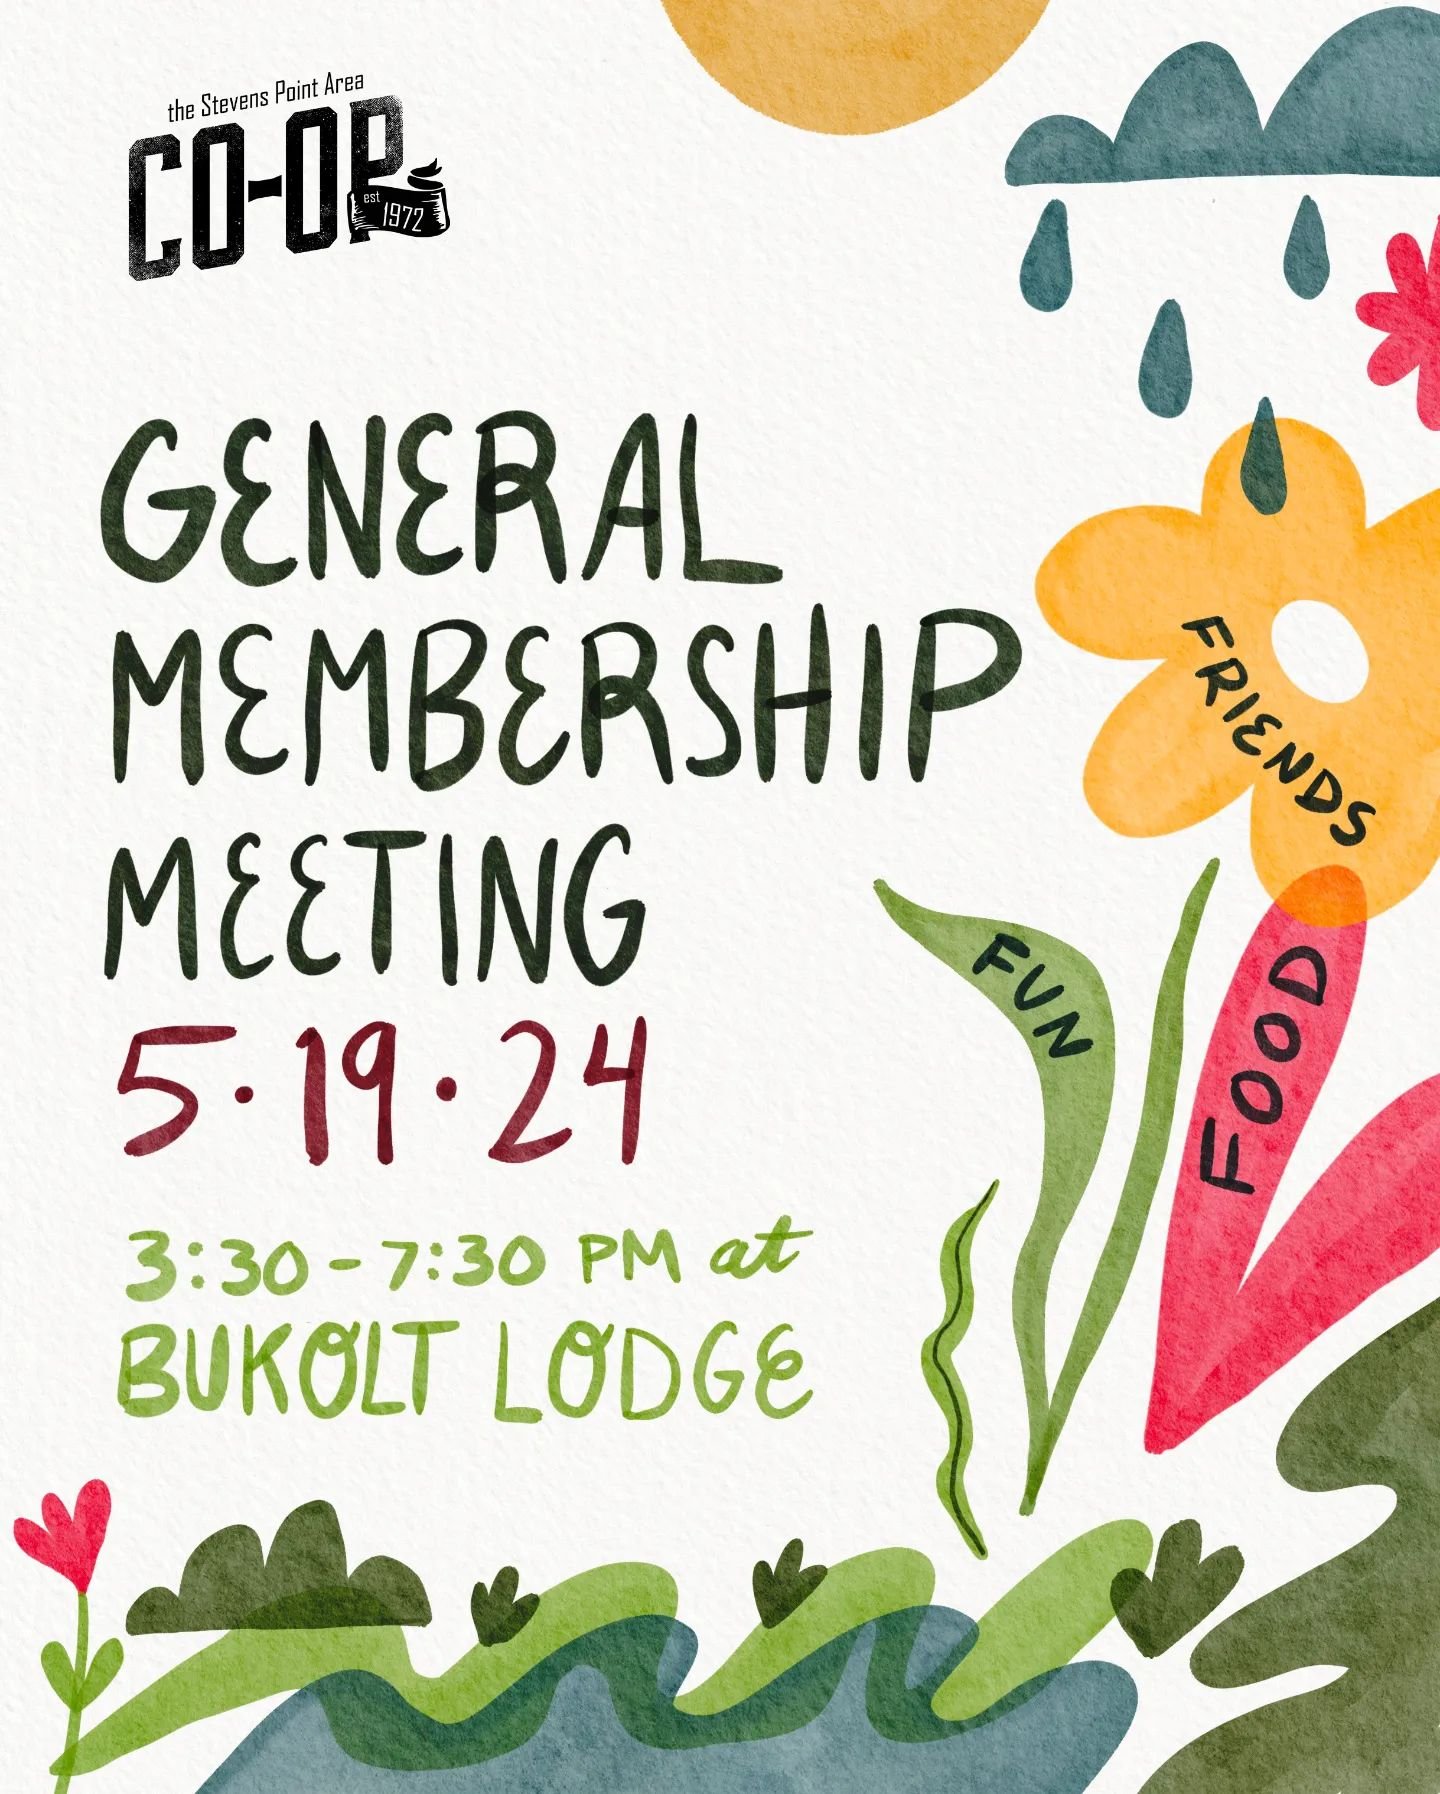 Our General Membership Meeting is approaching quickly and it's looking like it will be a beautiful day! Here's what you can expect:

🌱Free snacks and raffle baskets
🌱Delicious food truck items from Chef C's for purchase (cash only)
🌱Some of our ol